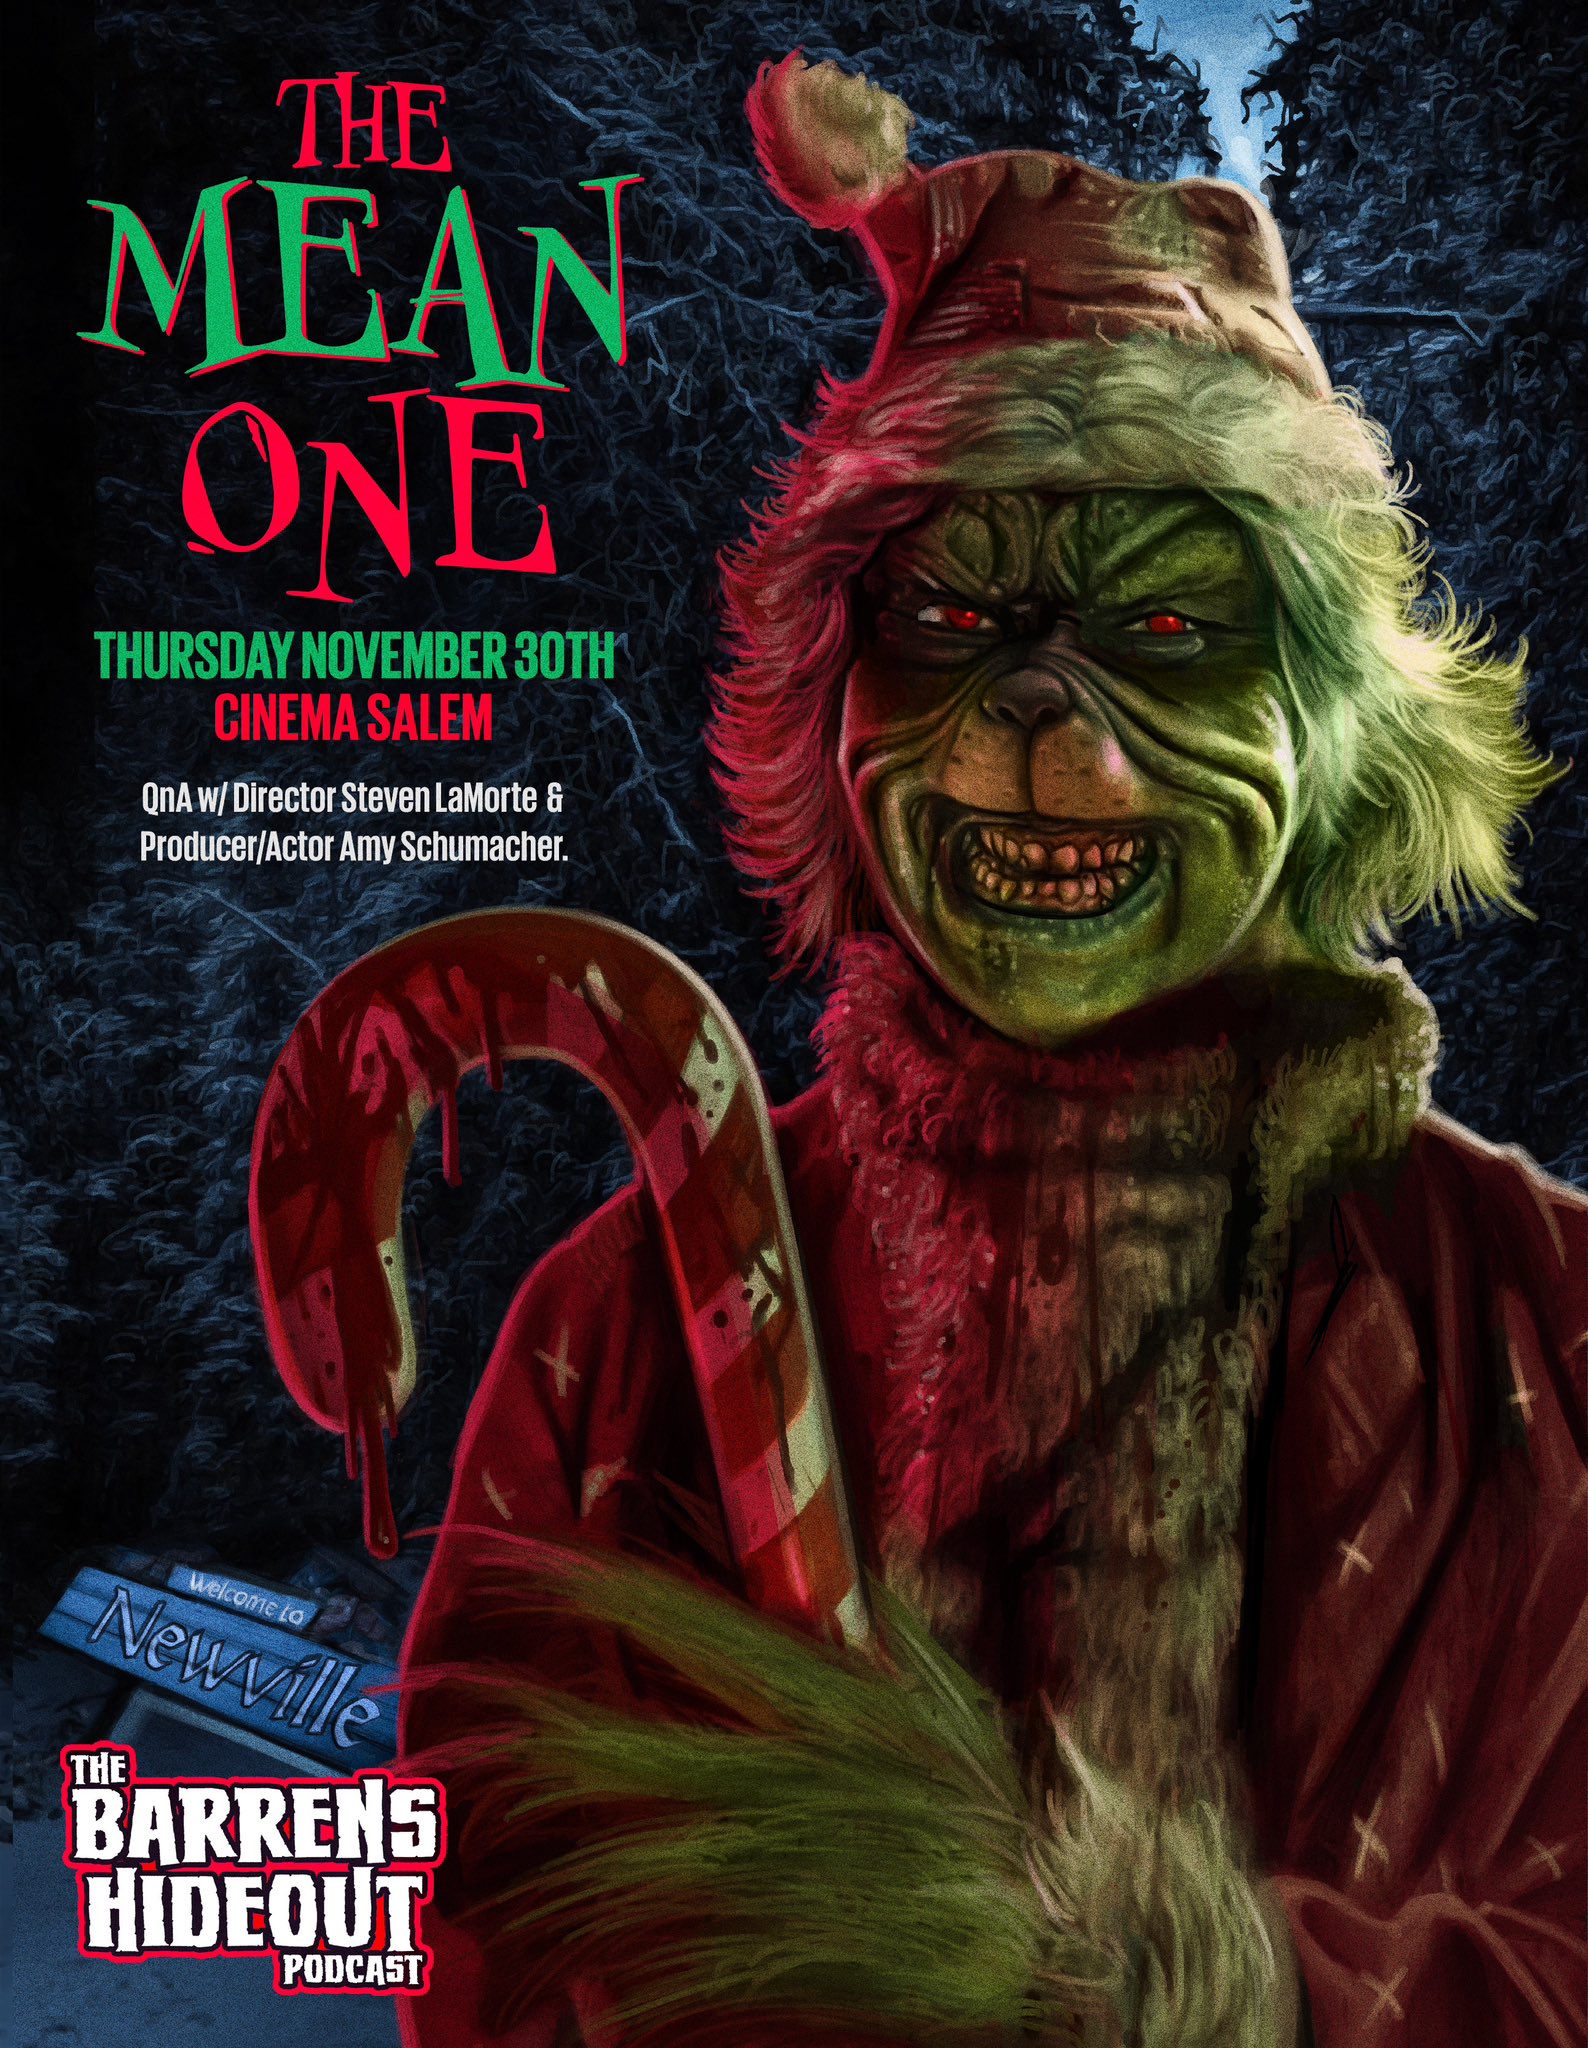 The Barrens Hideout Podcast on X: Be sure to grab your tickets for this  amazing kick-off to the Holiday Season! THE MEAN ONE being shown with  Director Steven LaMorte and Producer/Actor Amy